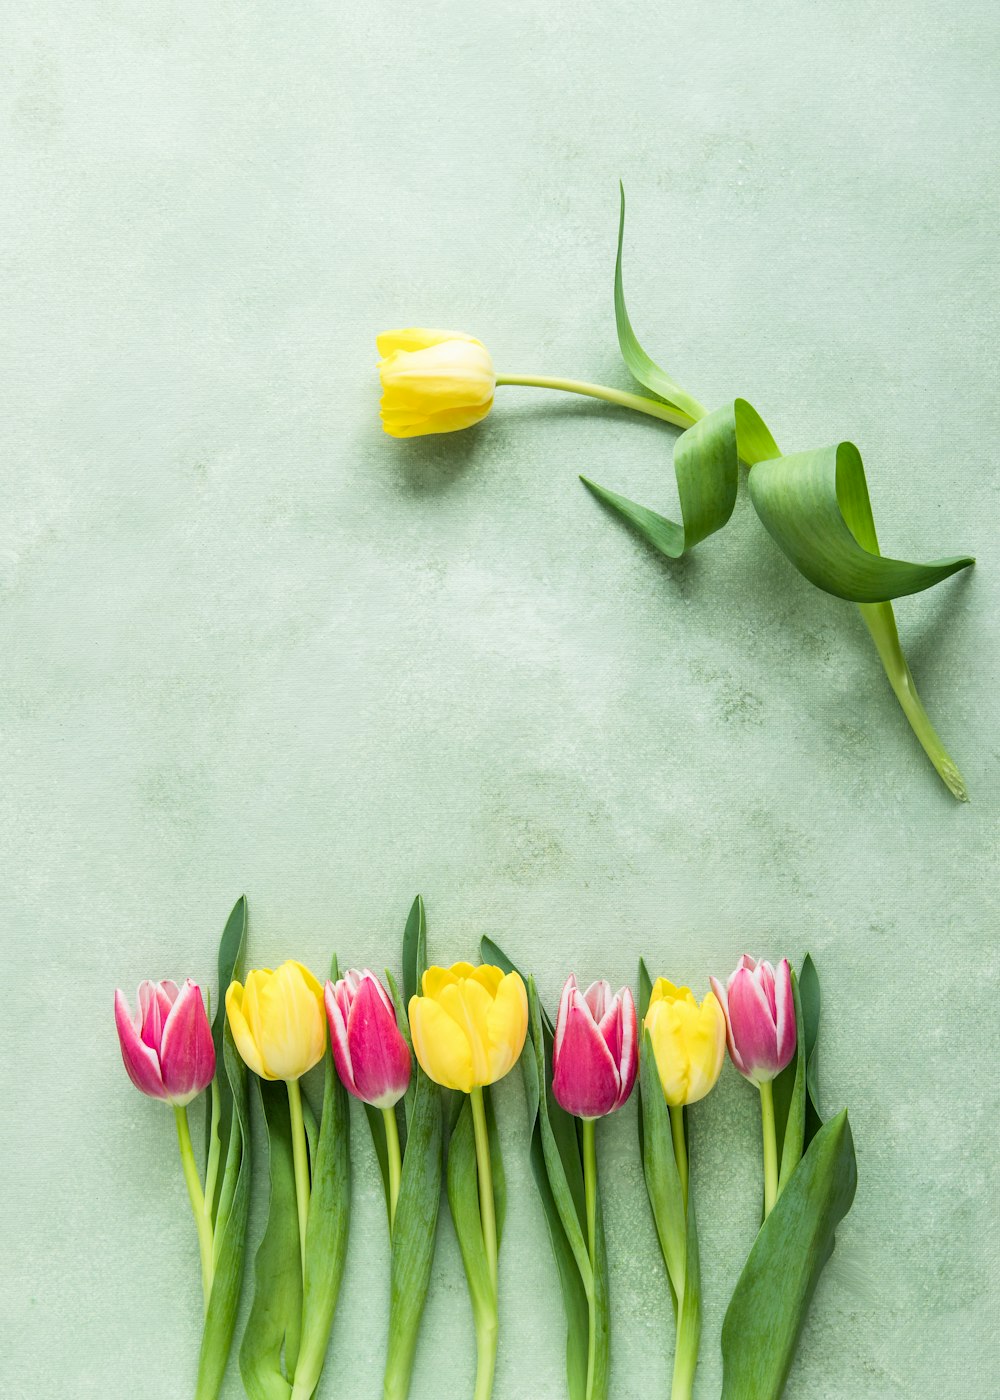 pink and yellow tulip flowers on teal surface